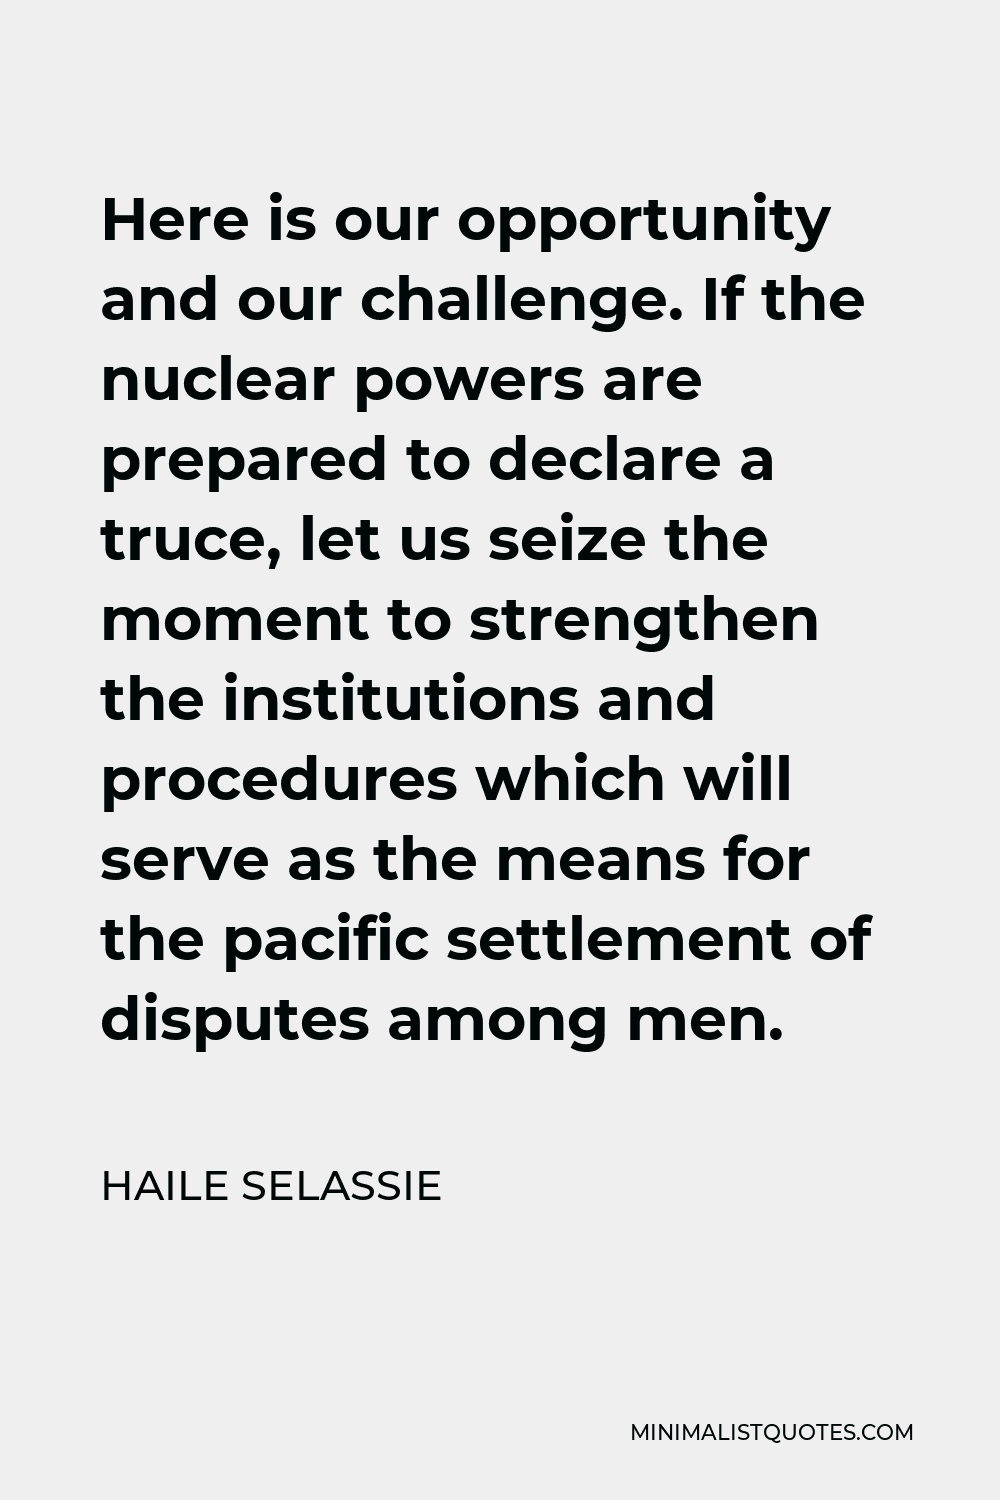 Haile Selassie Quote - Here is our opportunity and our challenge. If the nuclear powers are prepared to declare a truce, let us seize the moment to strengthen the institutions and procedures which will serve as the means for the pacific settlement of disputes among men.